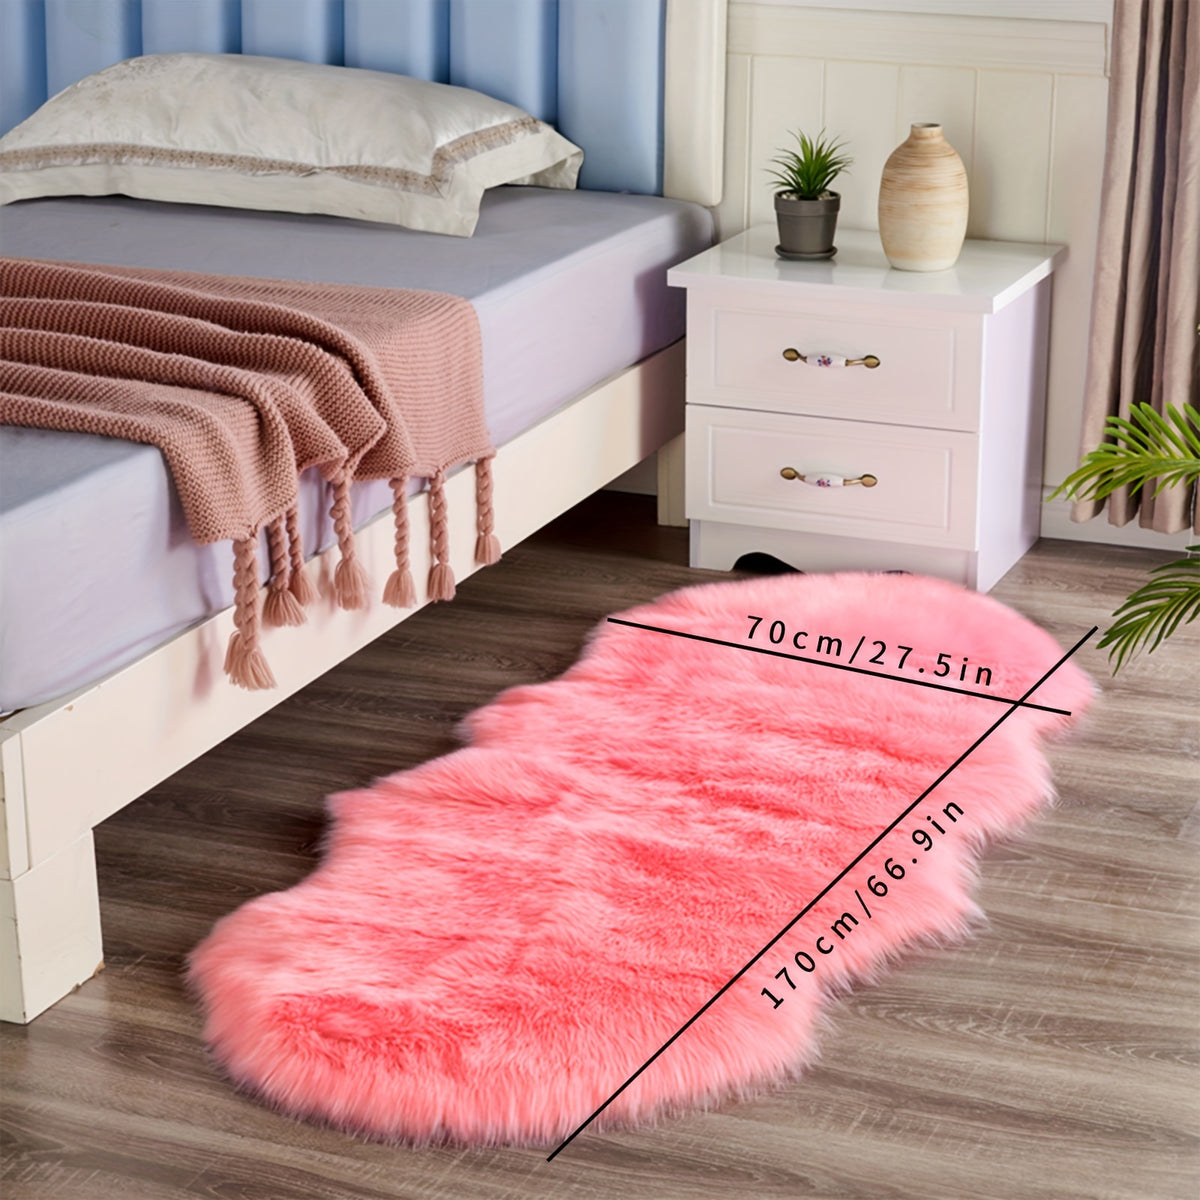 Nordic Shaggy Carpet Rug - Soft, Fluffy, and Fuzzy Area Rug